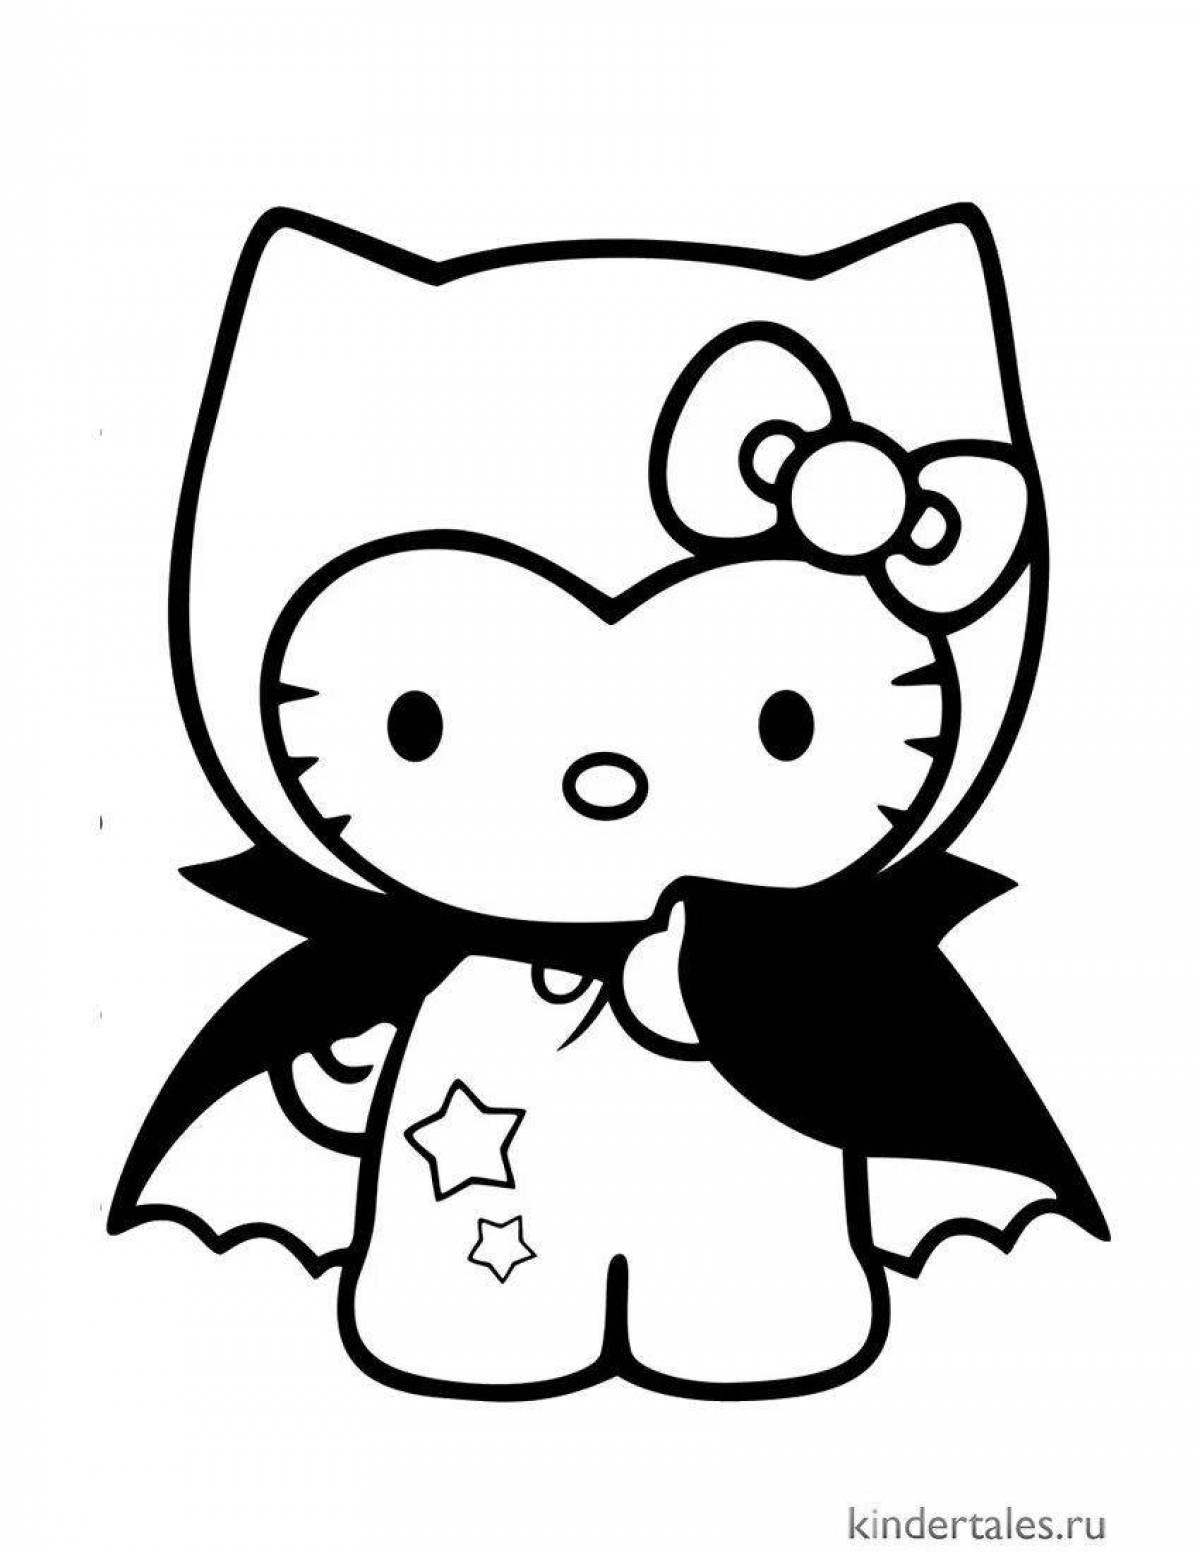 Relaxing coloring hello kitty black